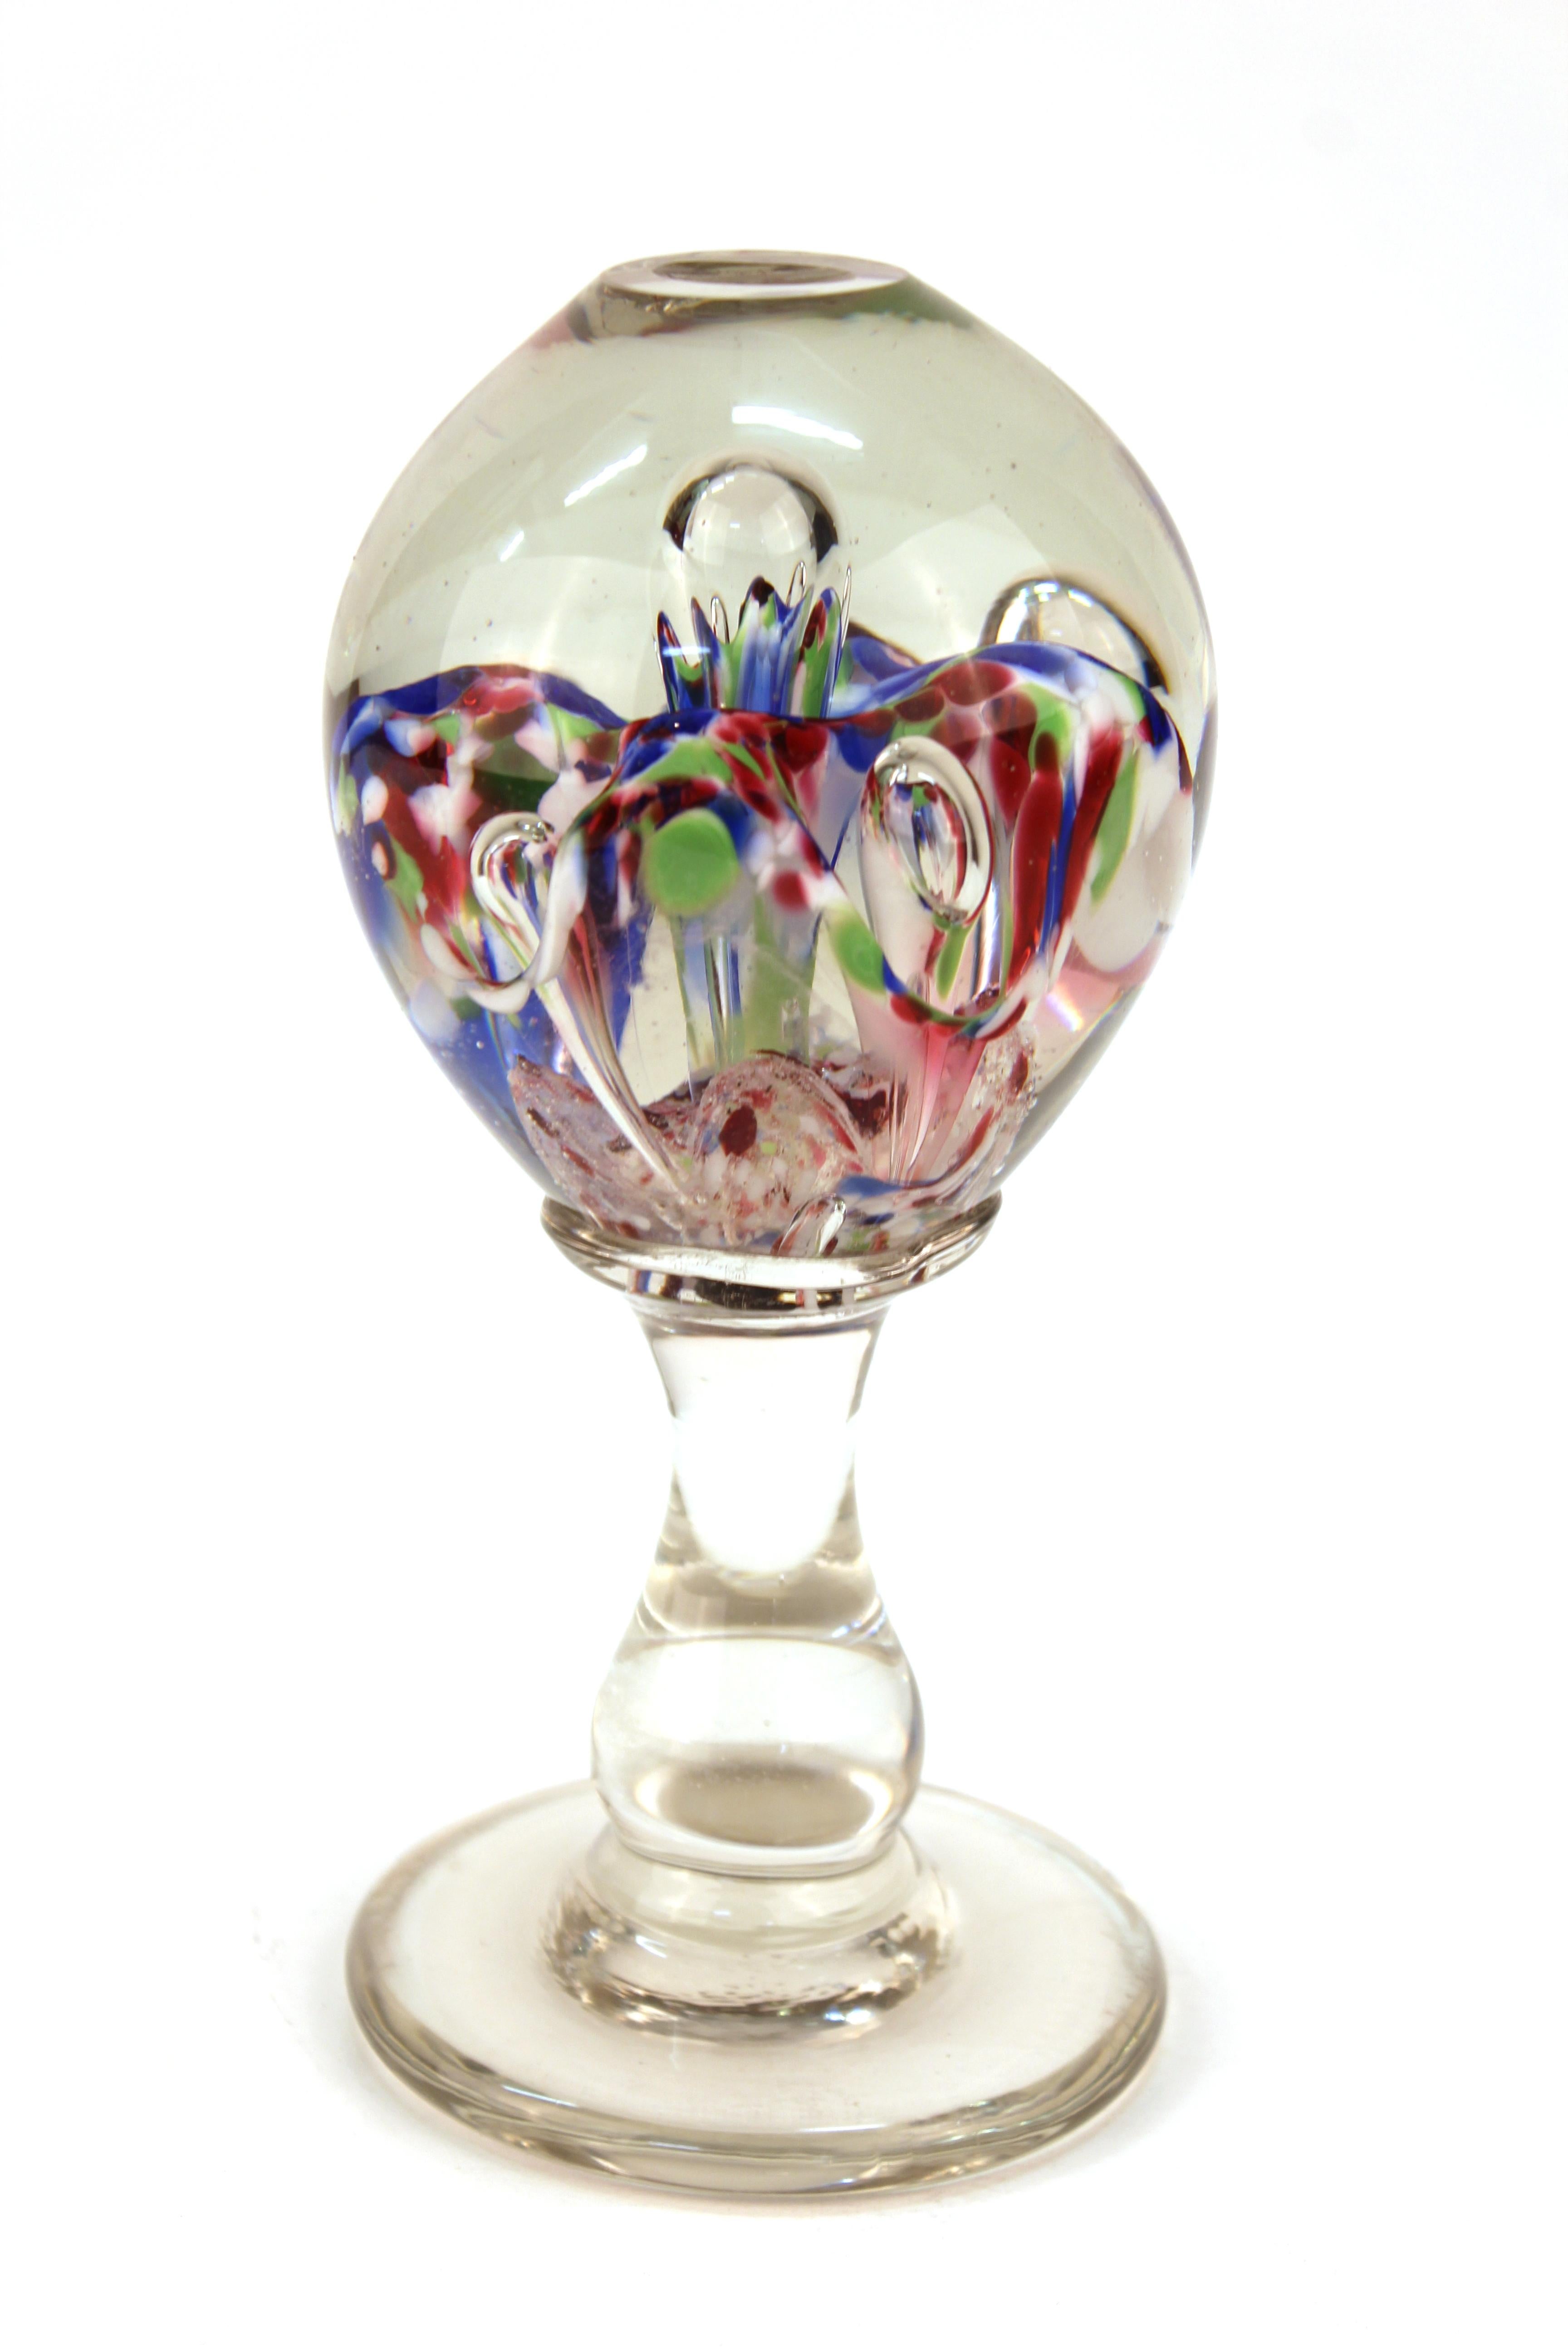 Italian Mid-Century Modern Murano art glass sphere with floral motif atop a glass Stand. The item is in great vintage condition with age-appropriate wear to the bottom.